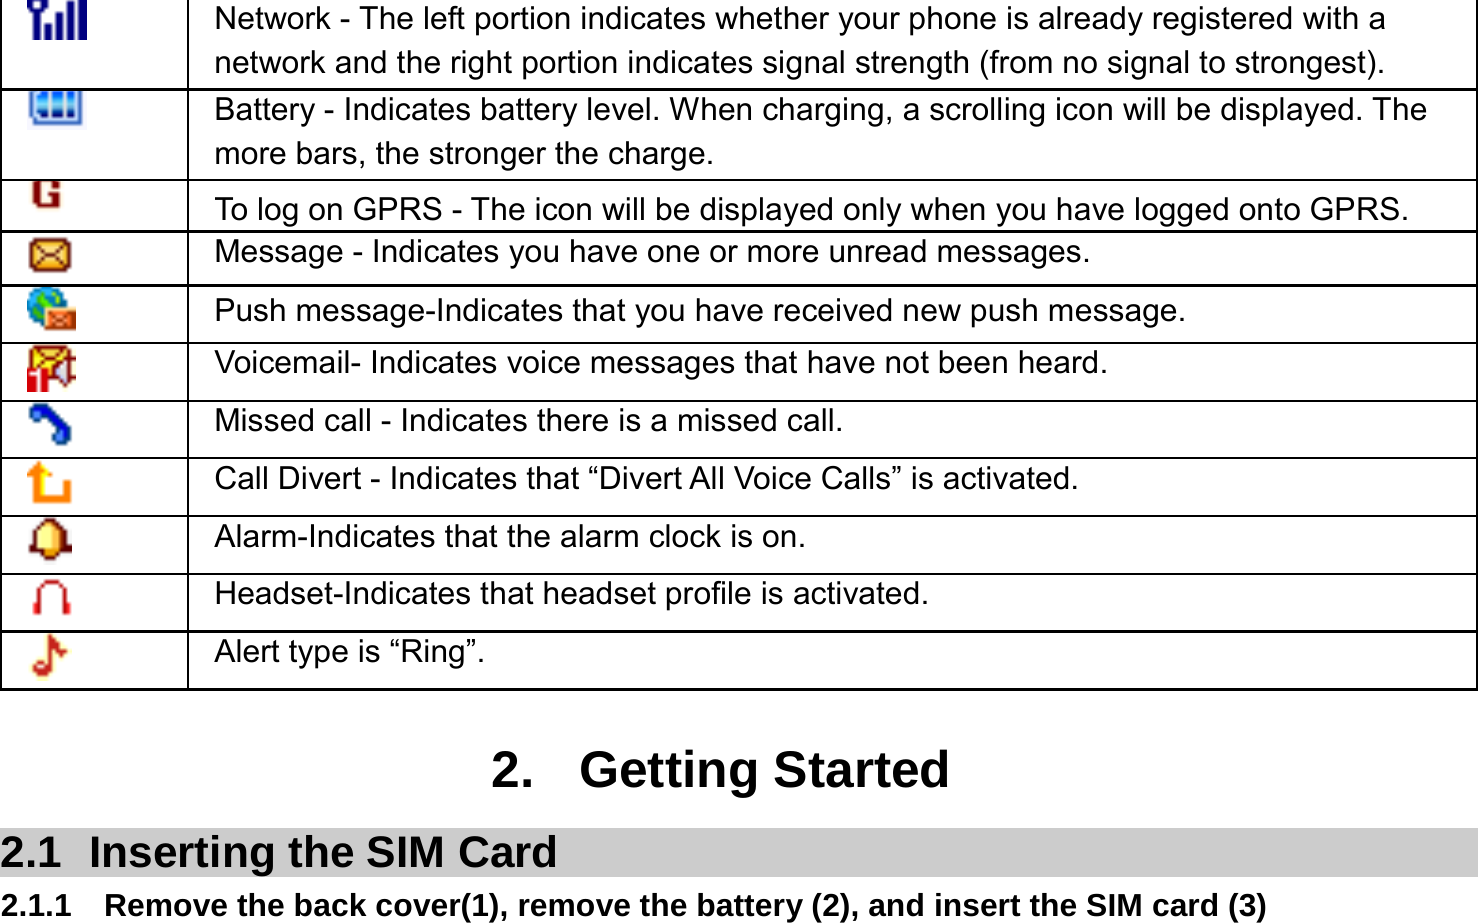   Network - The left portion indicates whether your phone is already registered with a network and the right portion indicates signal strength (from no signal to strongest).  Battery - Indicates battery level. When charging, a scrolling icon will be displayed. The more bars, the stronger the charge.   To log on GPRS - The icon will be displayed only when you have logged onto GPRS.  Message - Indicates you have one or more unread messages.  Push message-Indicates that you have received new push message.  Voicemail- Indicates voice messages that have not been heard.  Missed call - Indicates there is a missed call.  Call Divert - Indicates that “Divert All Voice Calls” is activated.  Alarm-Indicates that the alarm clock is on.  Headset-Indicates that headset profile is activated.  Alert type is “Ring”.  2. Getting Started 2.1  Inserting the SIM Card 2.1.1  Remove the back cover(1), remove the battery (2), and insert the SIM card (3) 